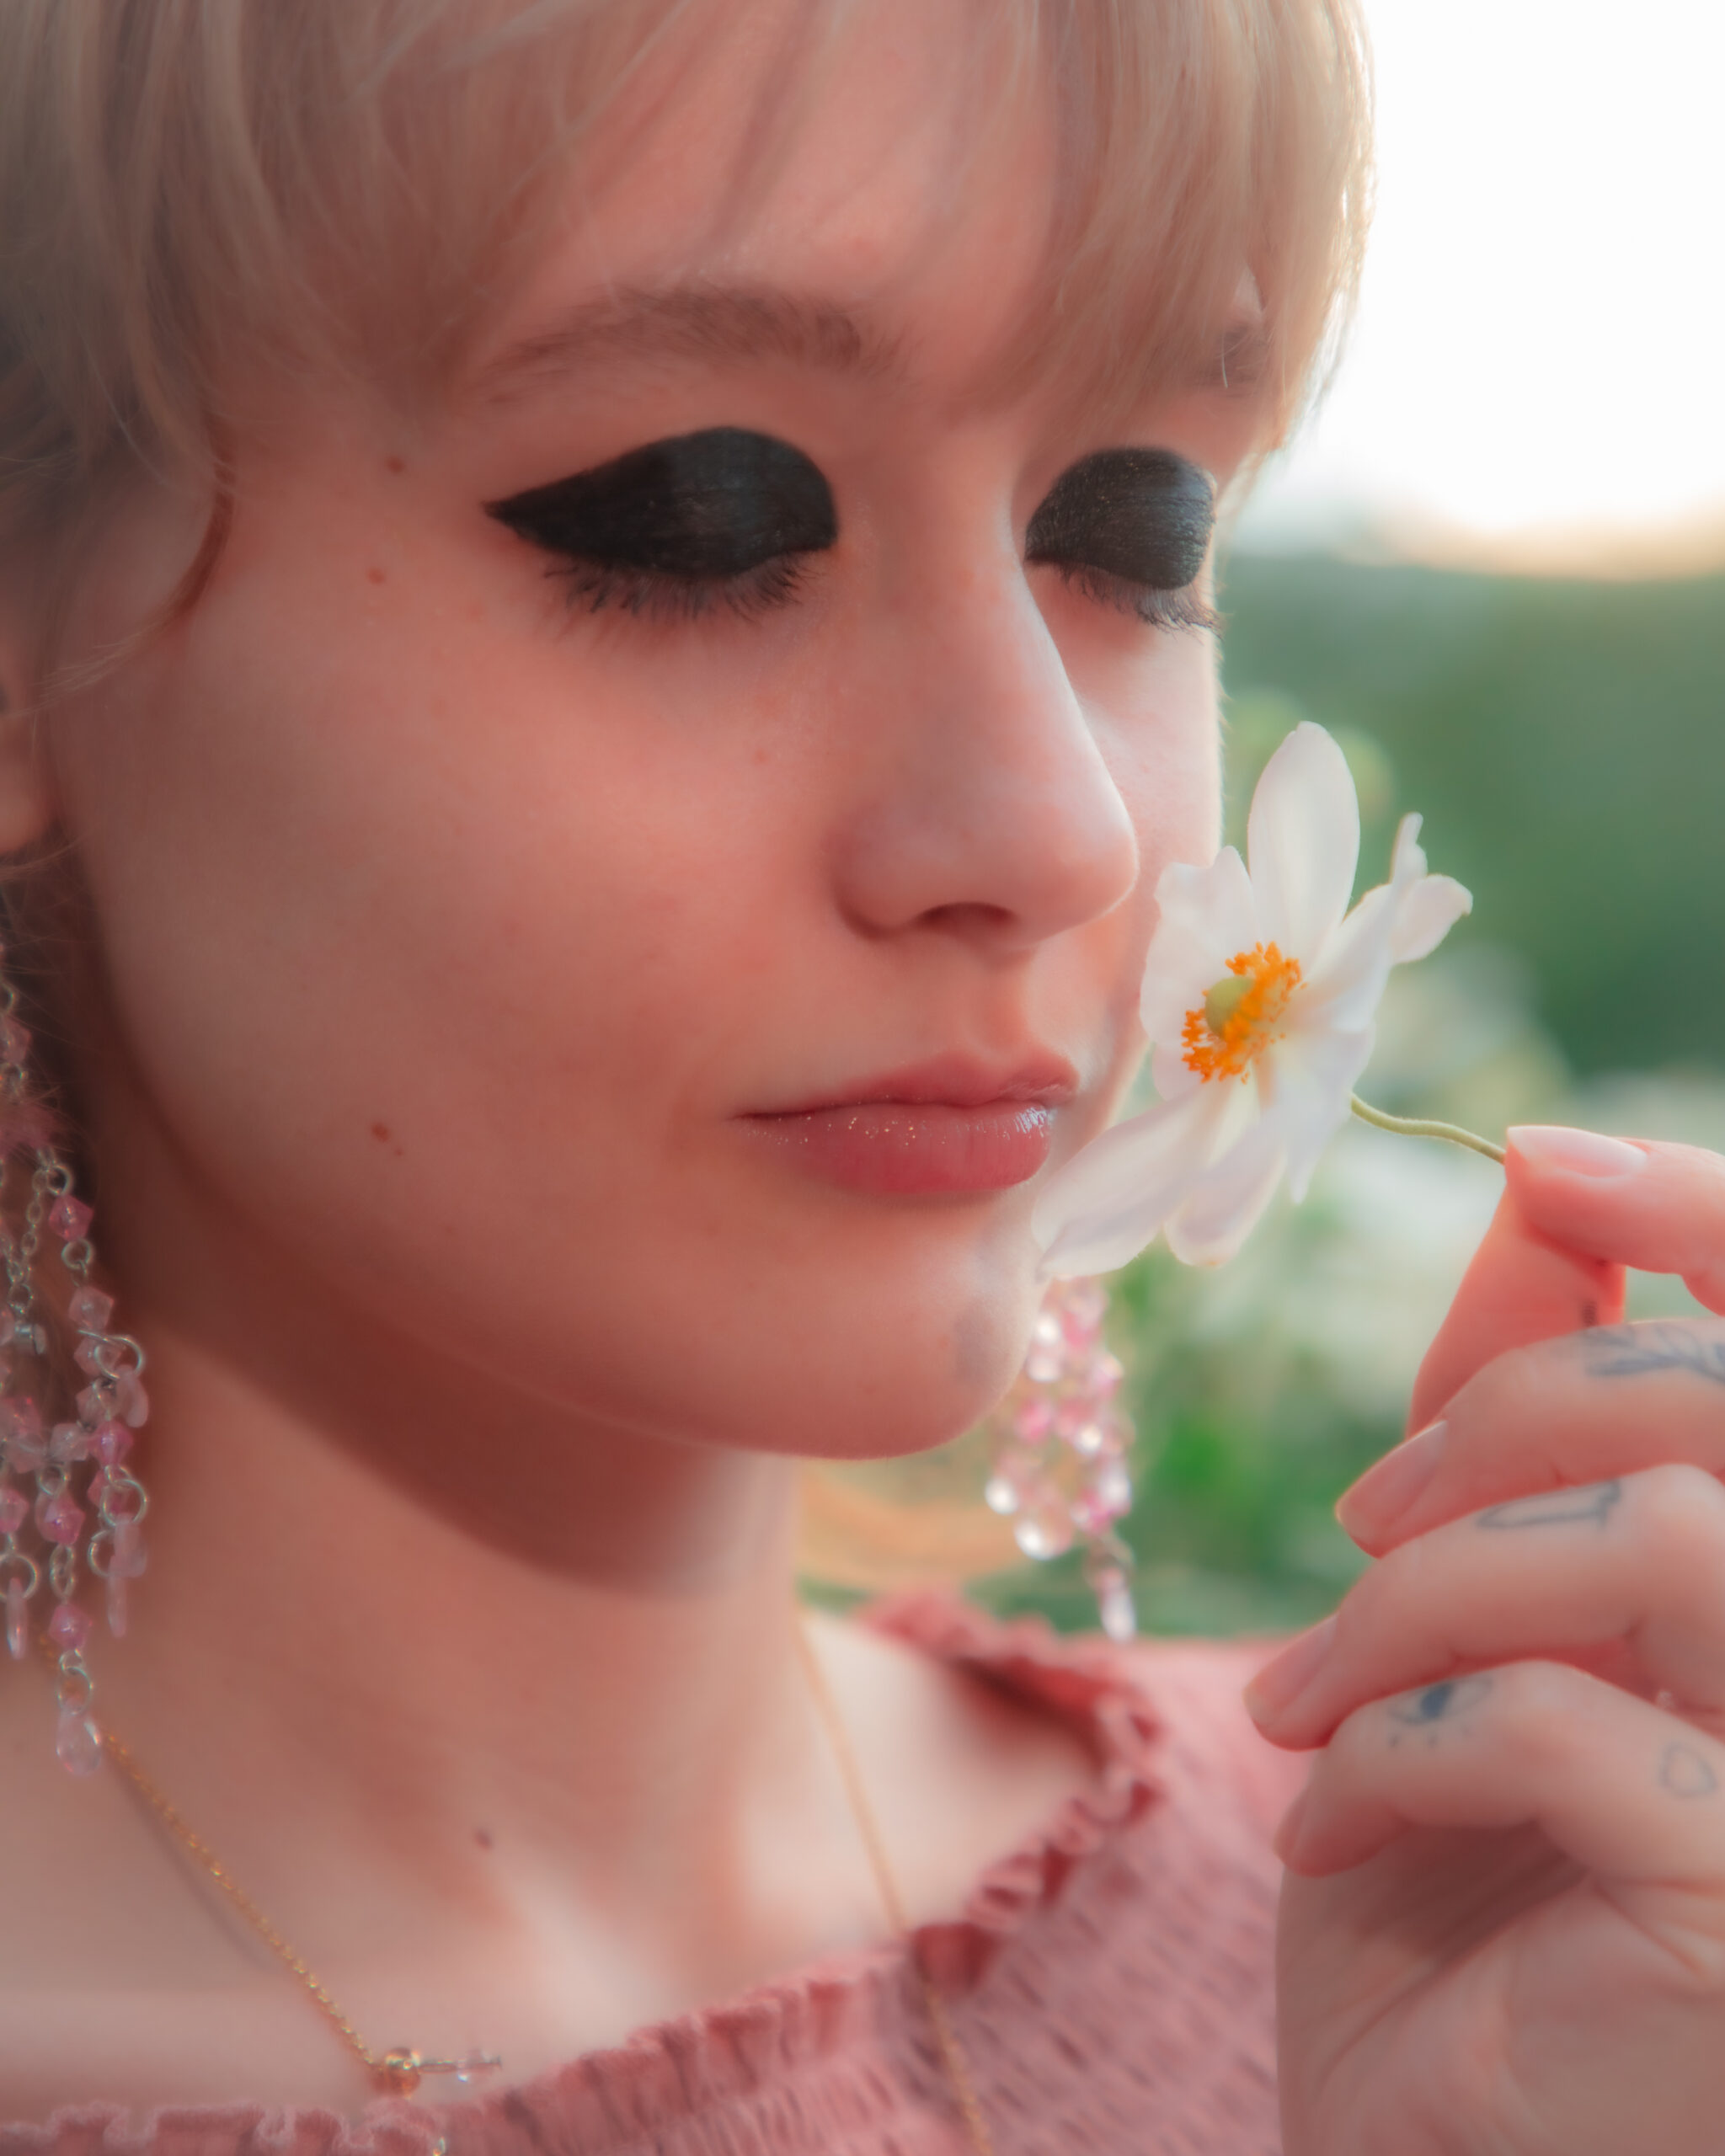 The image is a close-up of a woman holding a white flower close to her face, smelling it with closed eyes. She has prominent black eye makeup, blonde hair, and is wearing a pink blouse. Her earrings are long and beaded, and a delicate necklace is visible. The background is softly blurred with a warm, glowing light, suggesting a setting with soft natural lighting, possibly during golden hour